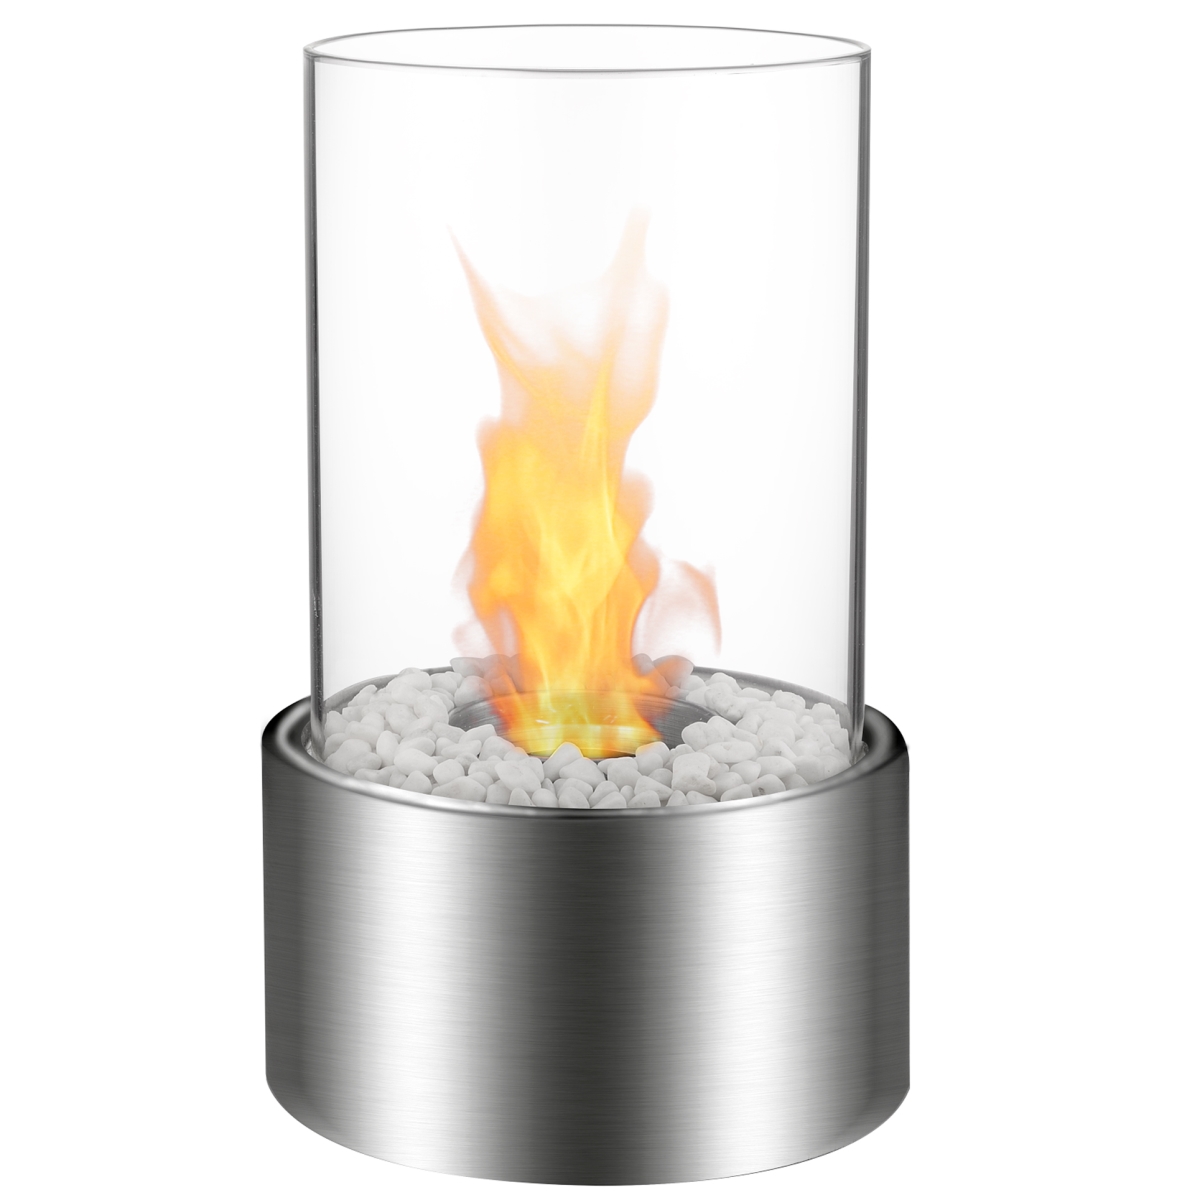 Regal Flame ET7001SS Eden Ventless Tabletop Portable Bio Ethanol Fireplace in Stainless Steel